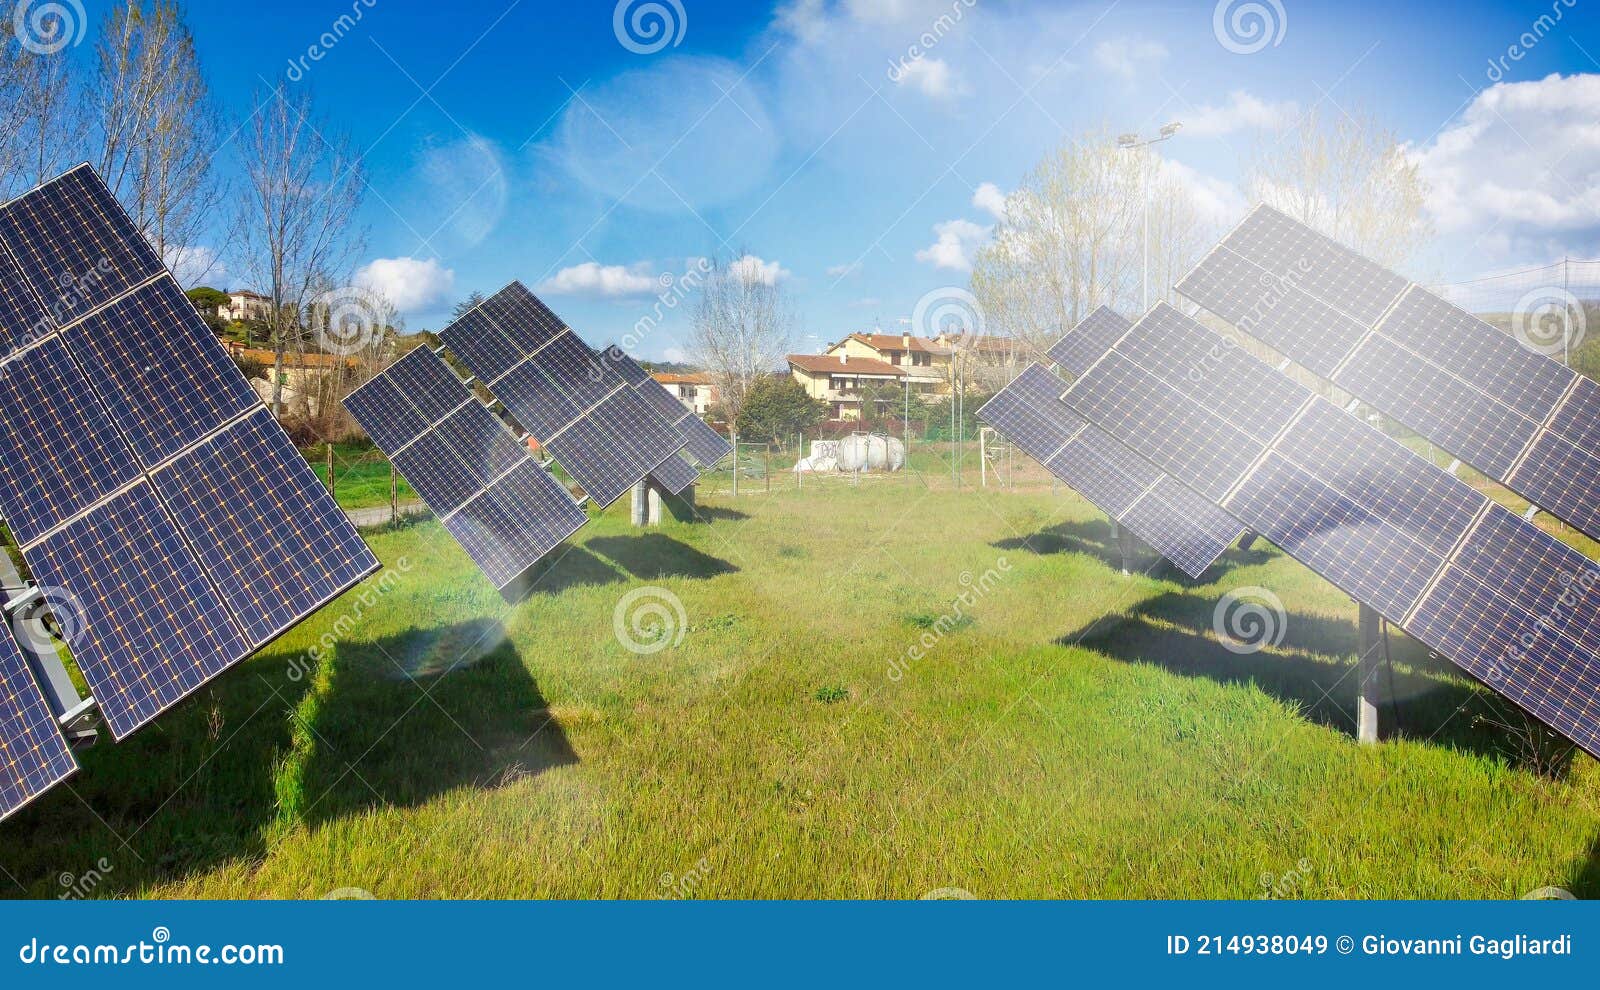 group of modern solar panels oriented to the sun